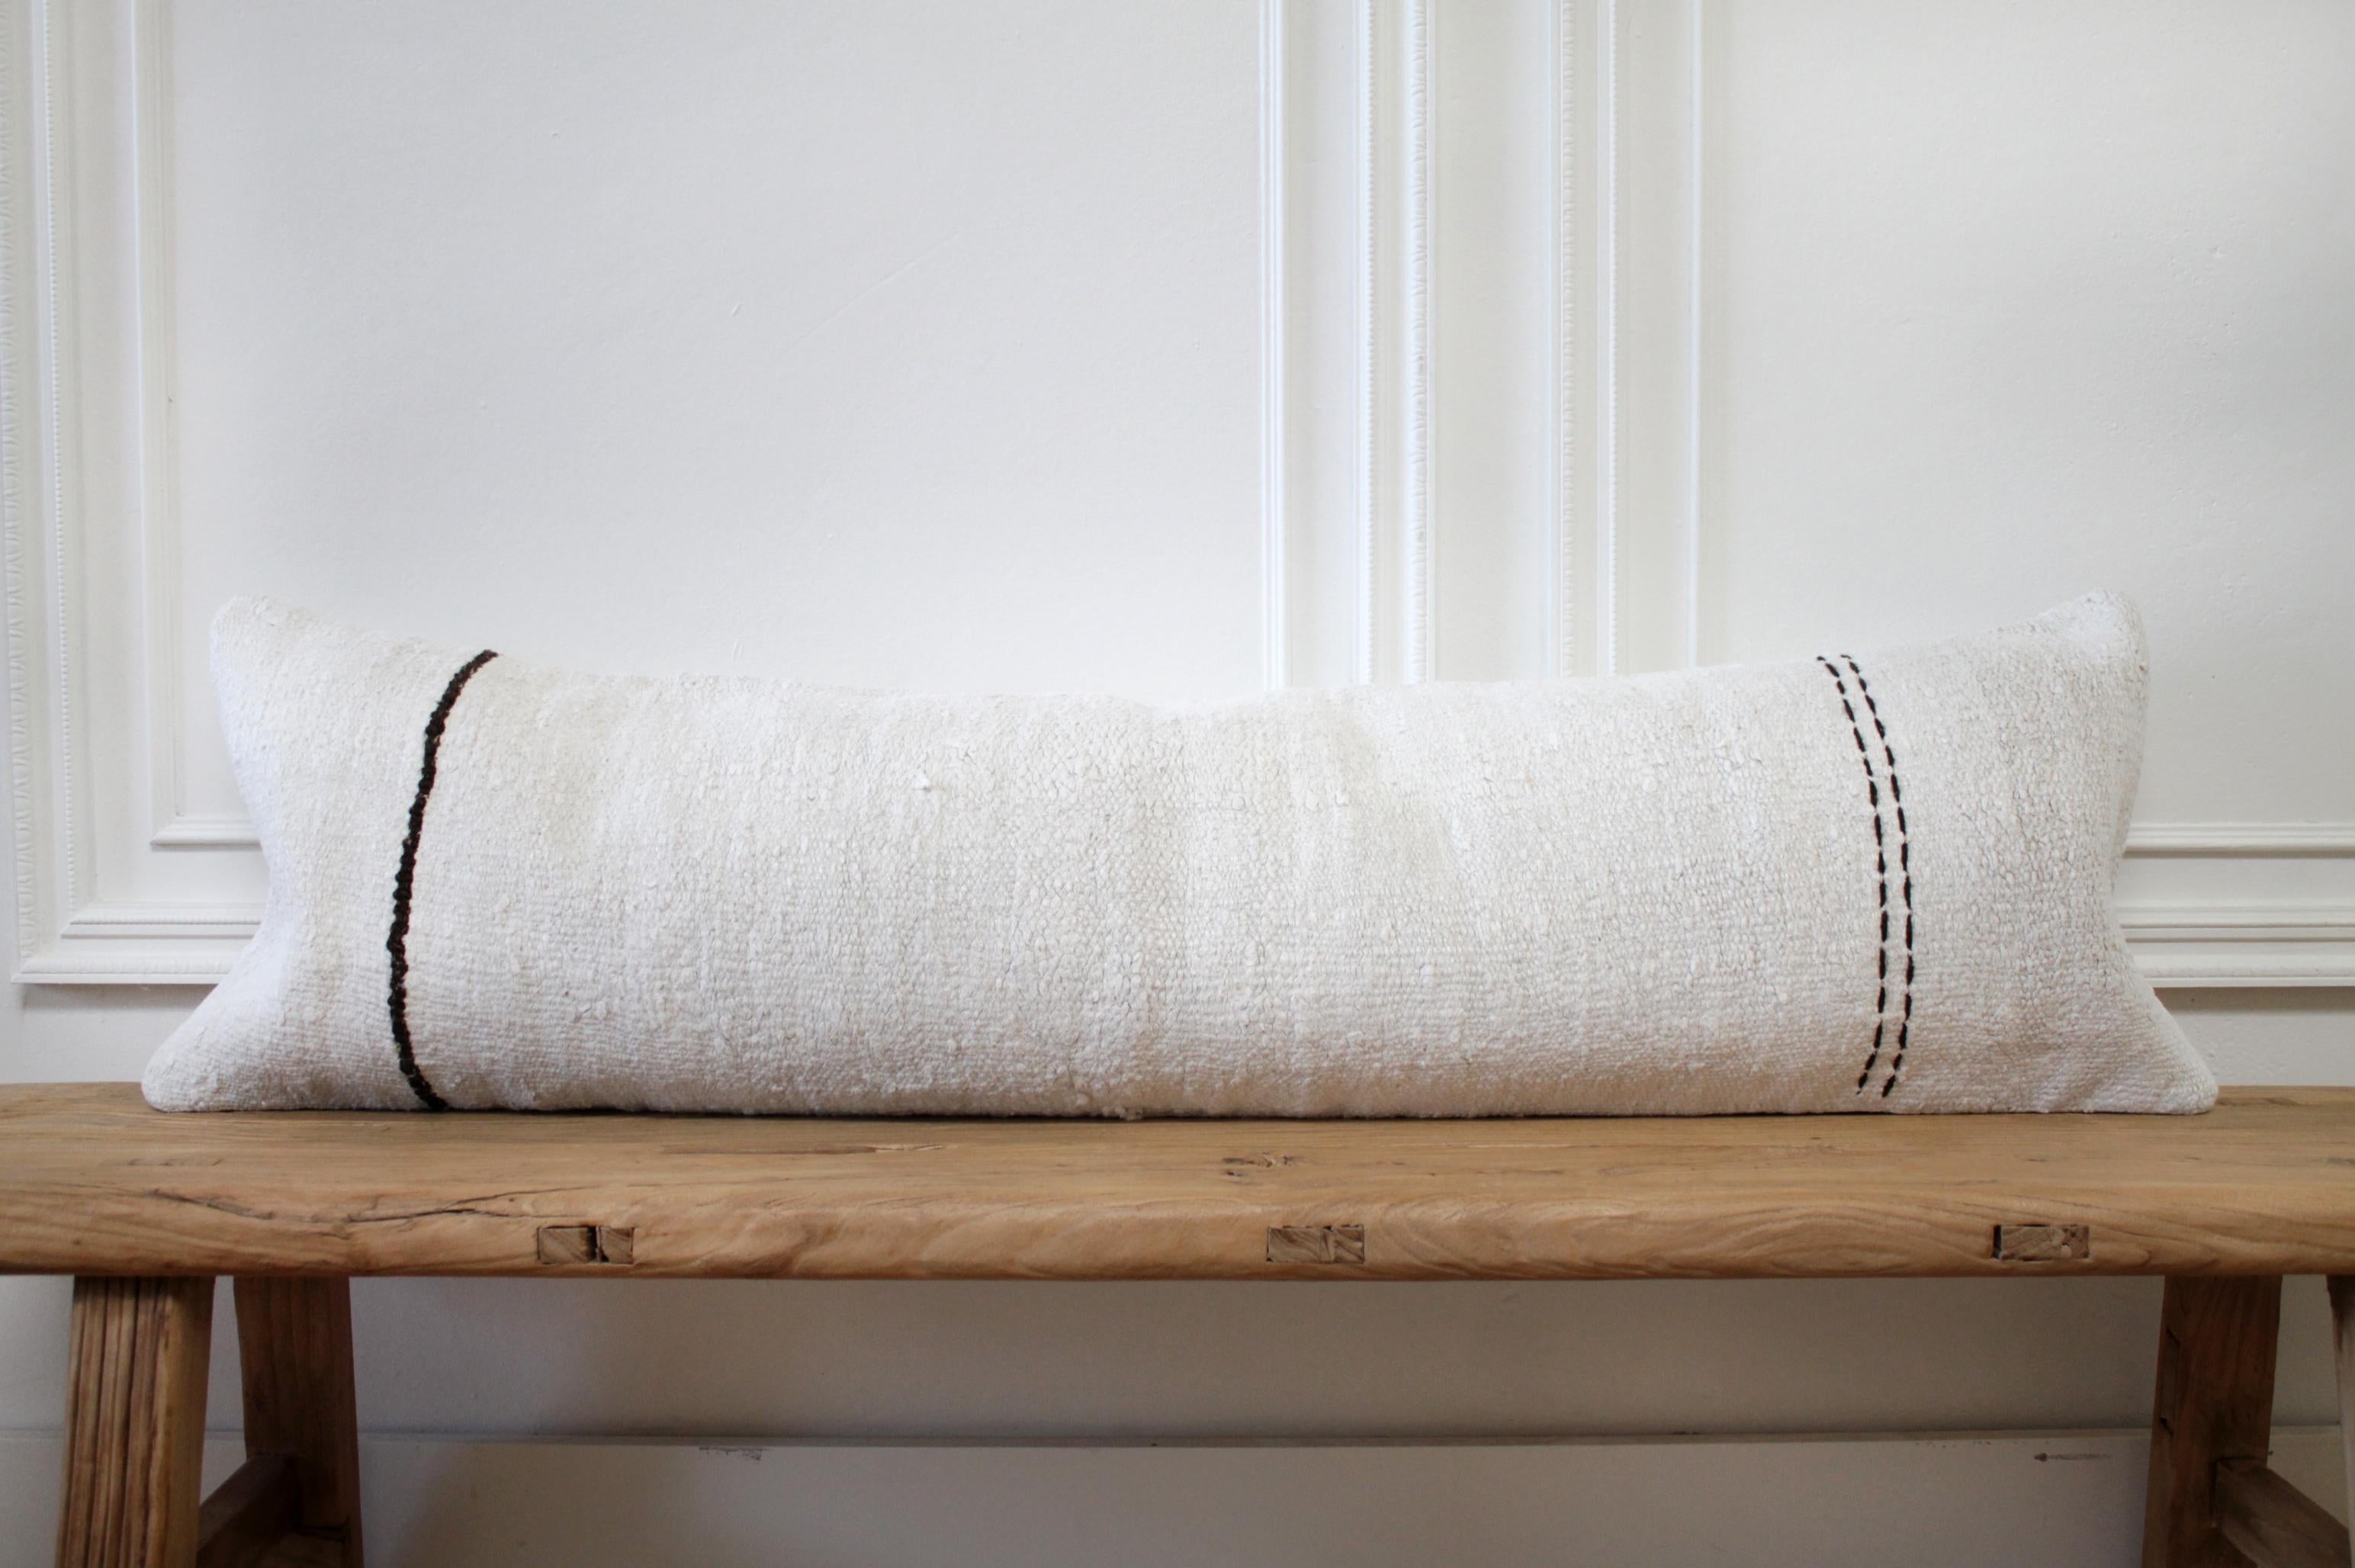 Vintage Turkish Hemp rug pillow in off white with stitched pattern on face of the pillow. This is a beautiful original hemp rug, in a white to off white color with goat hair textured minimalist stripe pattern. The backside is a coordinating fabric